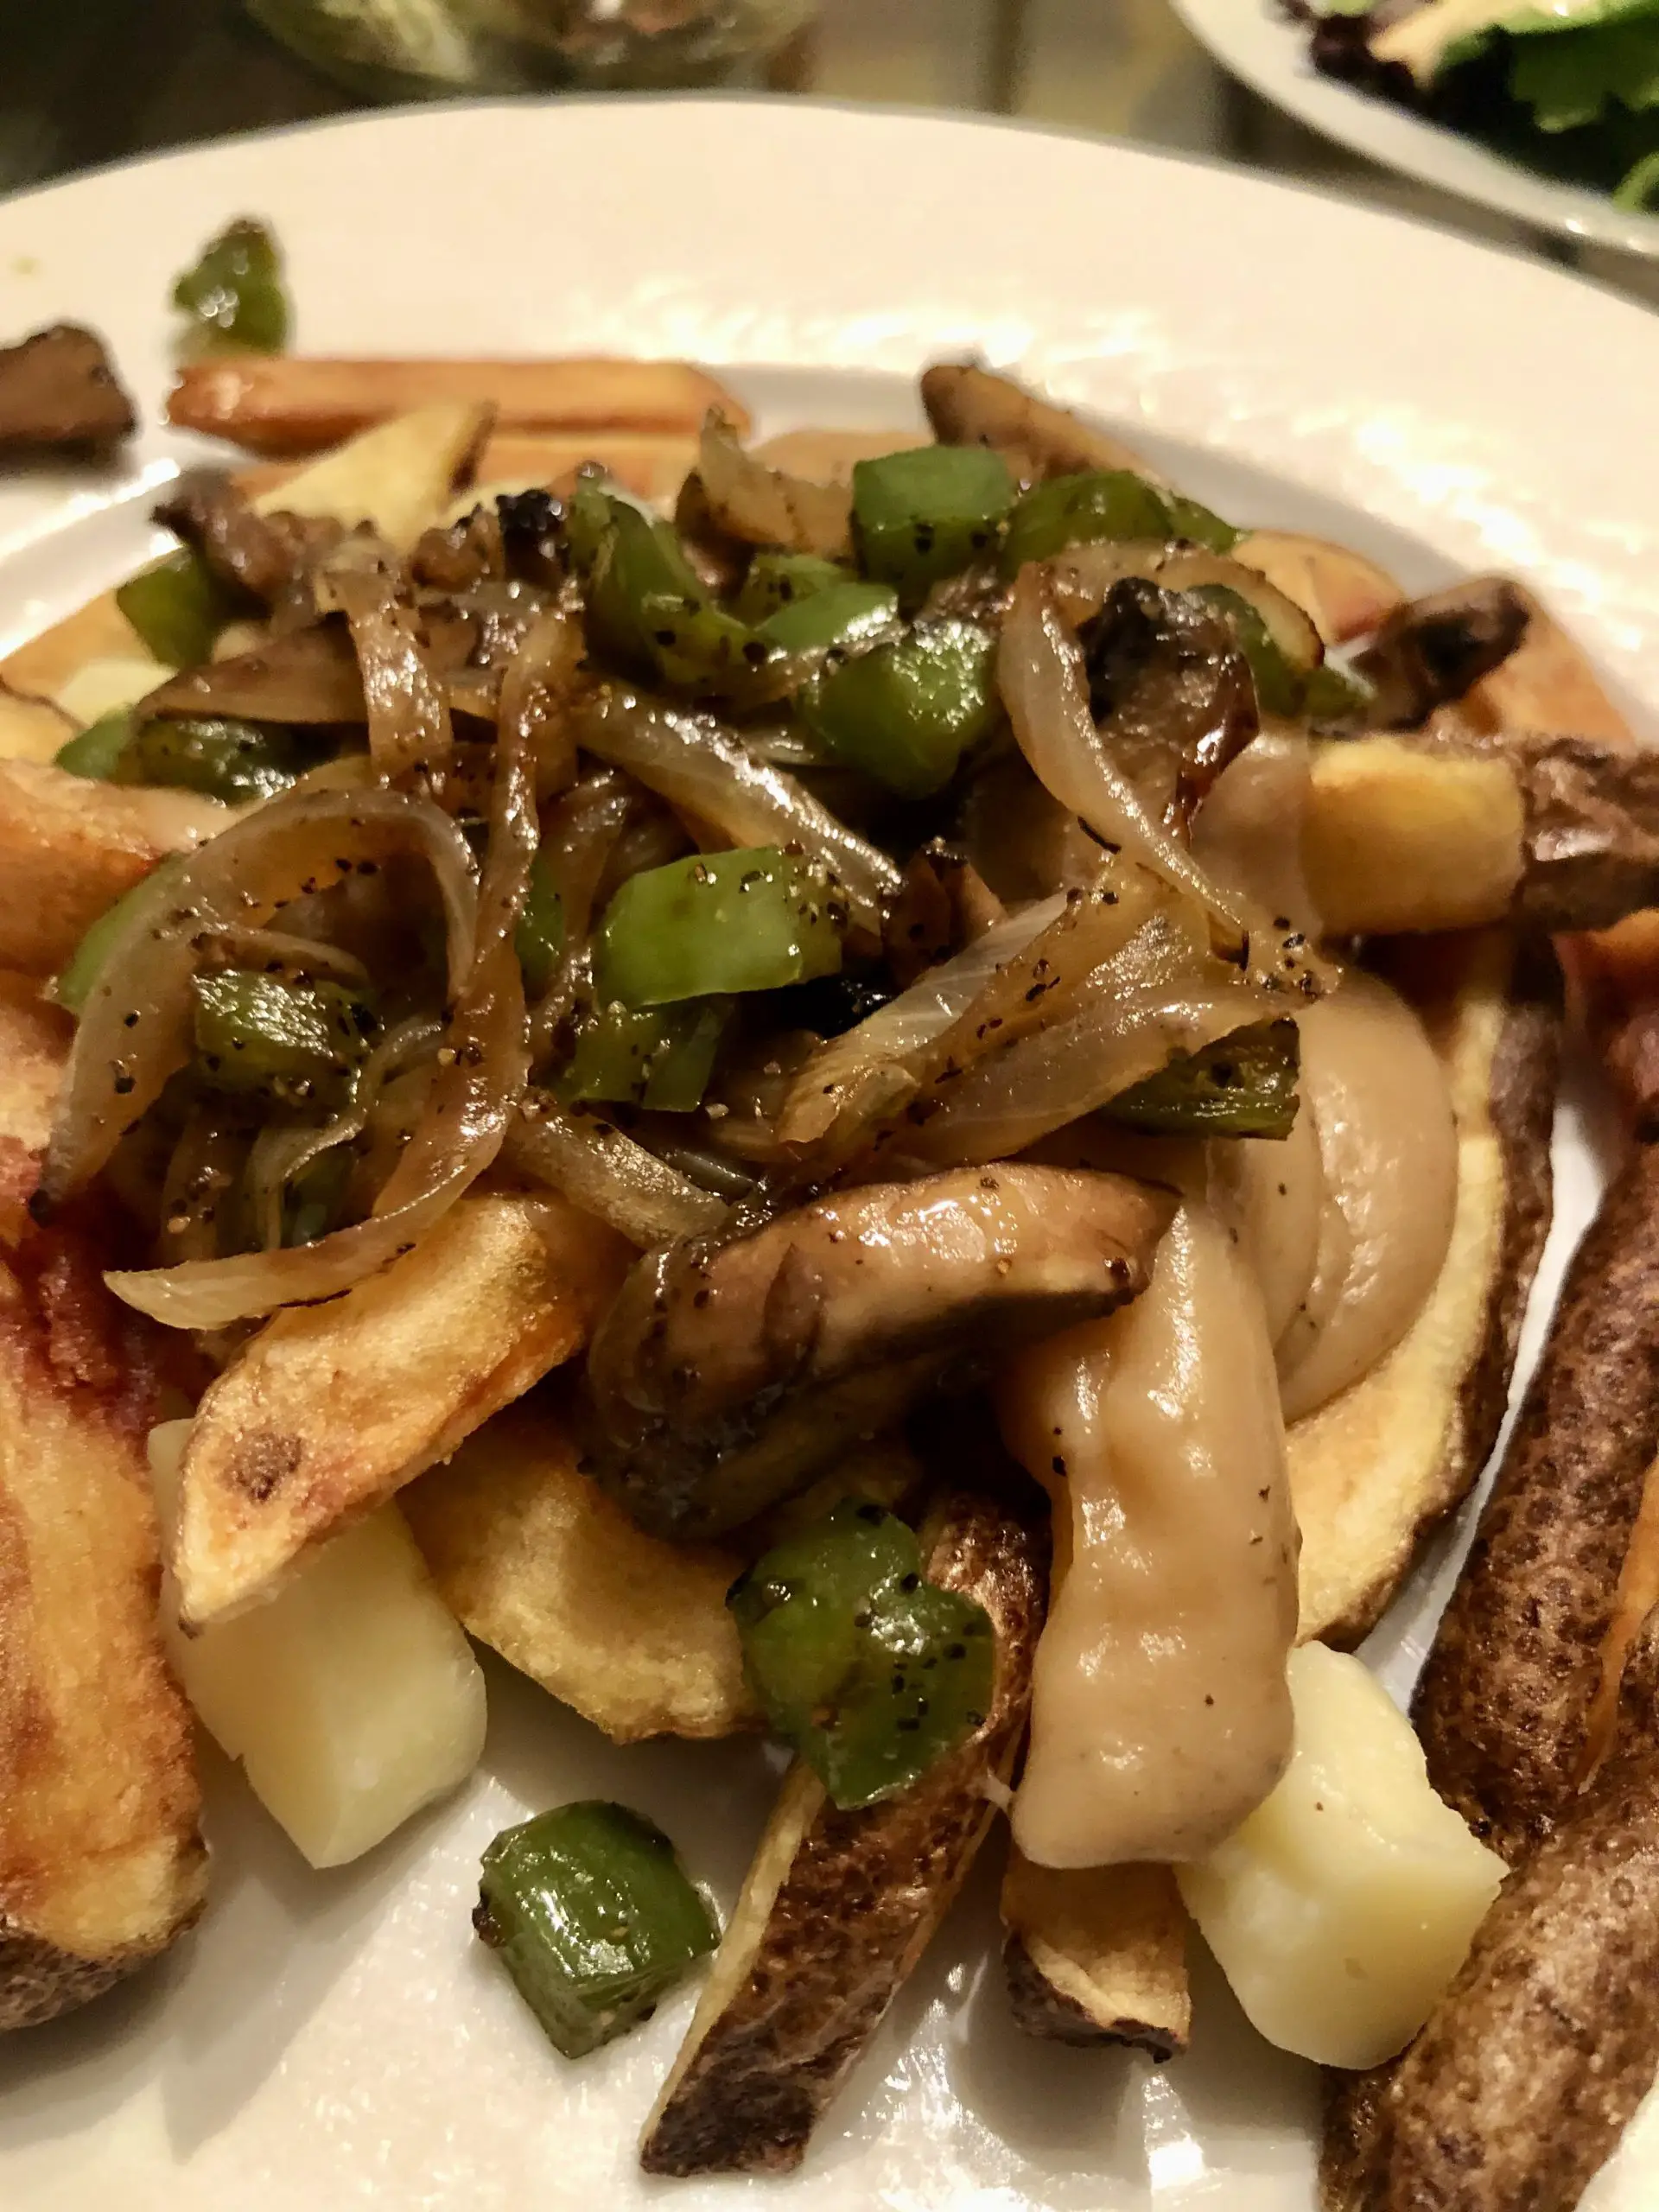 Poutine with mushrooms, onions, and green bell peppers